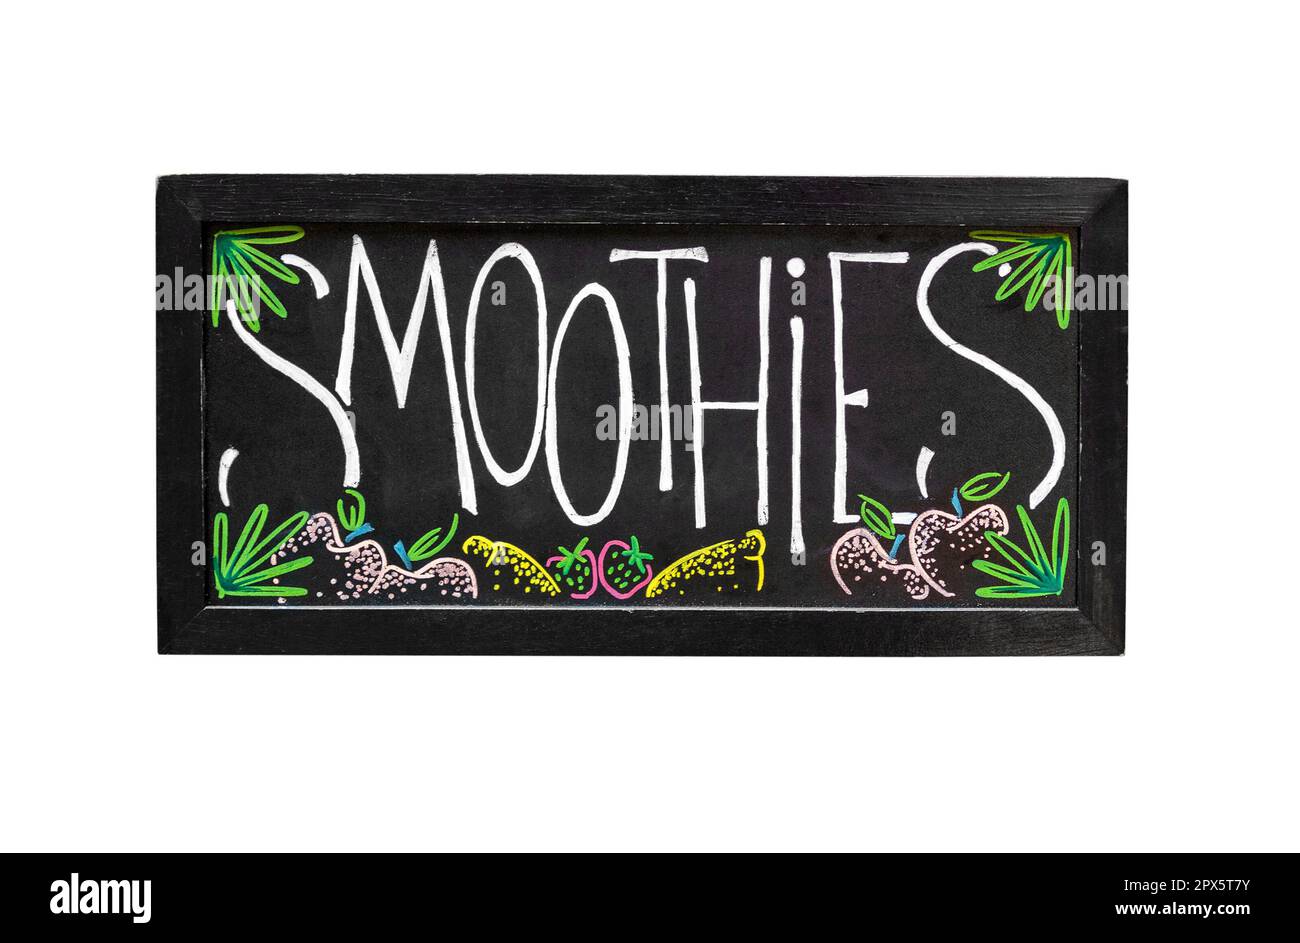 https://c8.alamy.com/comp/2PX5T7Y/smoothies-available-chalkboard-sign-isolated-on-white-background-healthy-drink-invitation-on-blackboard-2PX5T7Y.jpg